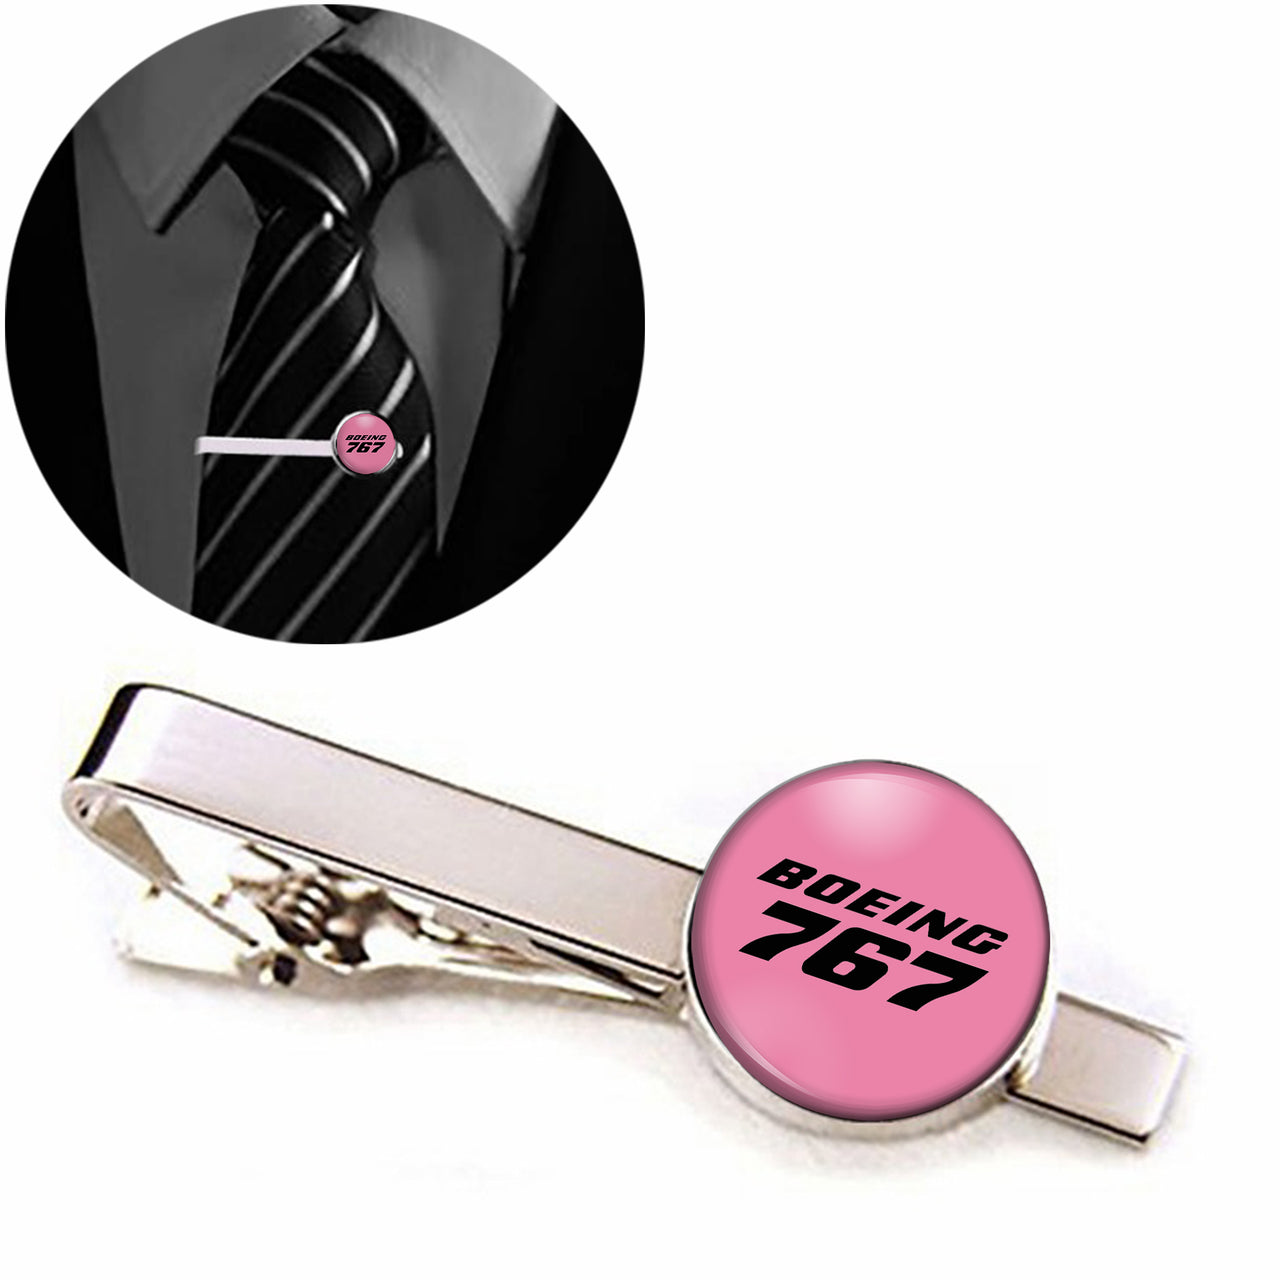 Boeing 767 & Text Designed Tie Clips